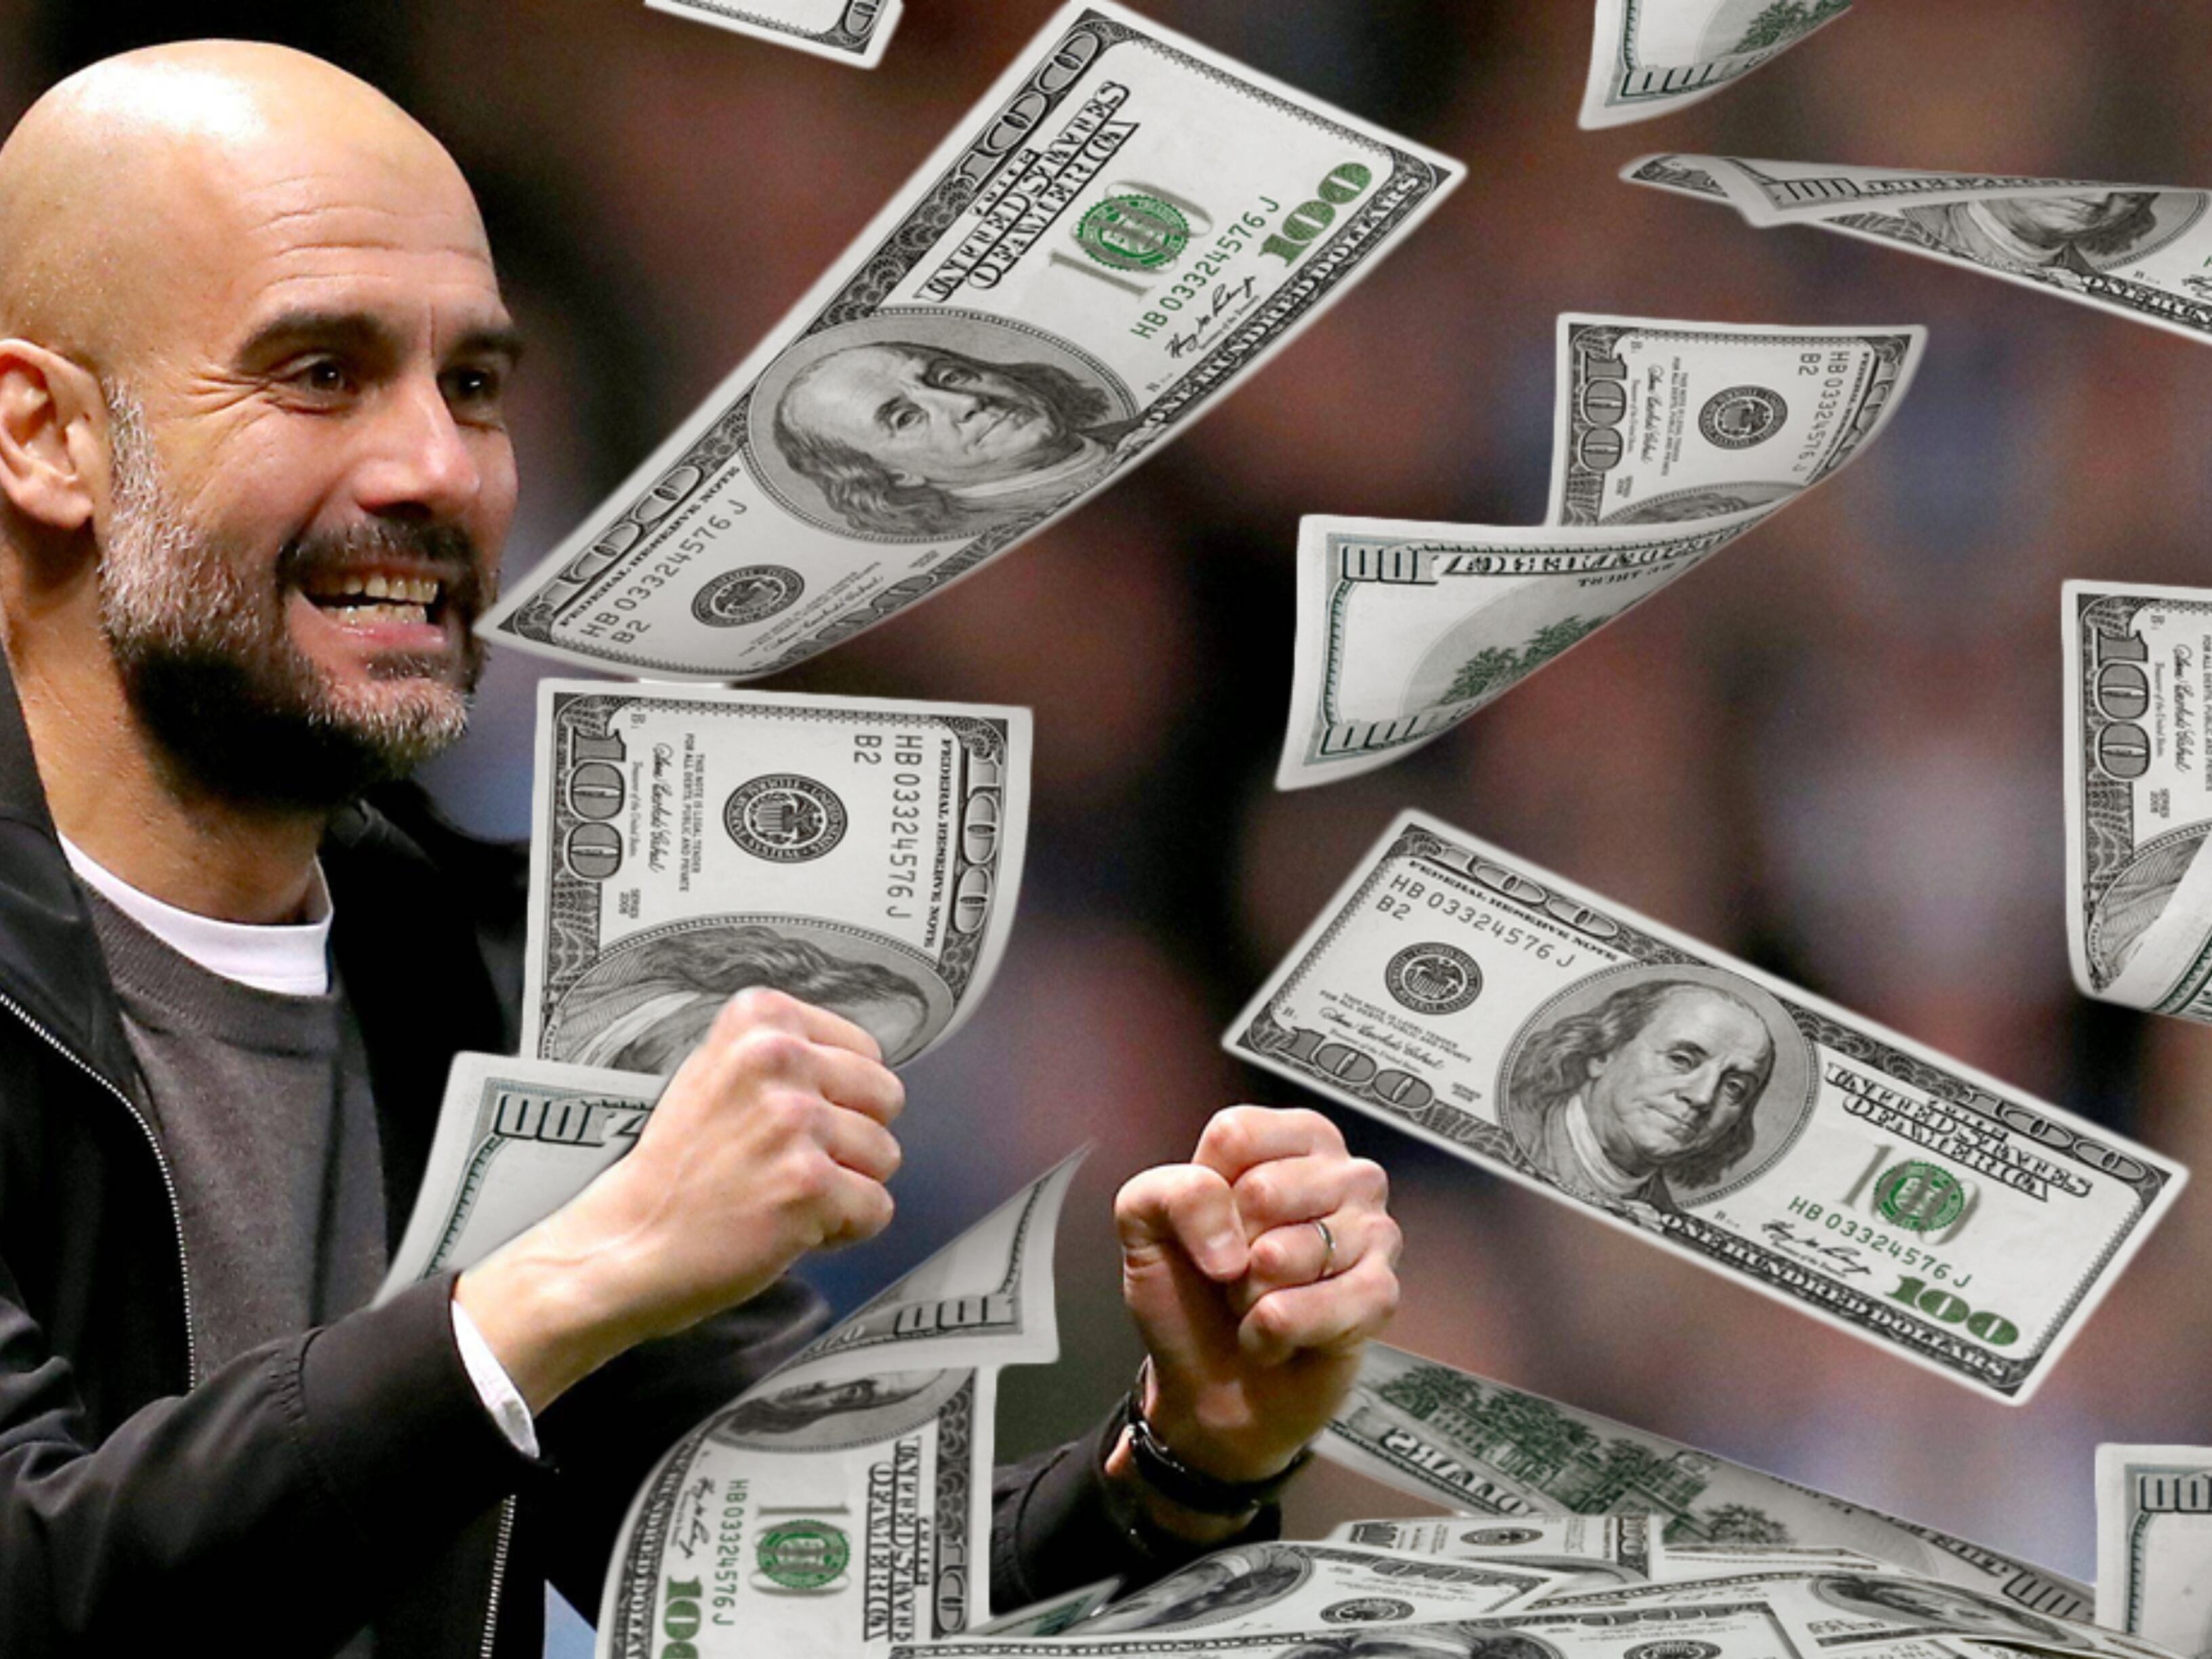 Guardiola earns $25 million at Man City, but is far from the highest-paid coach